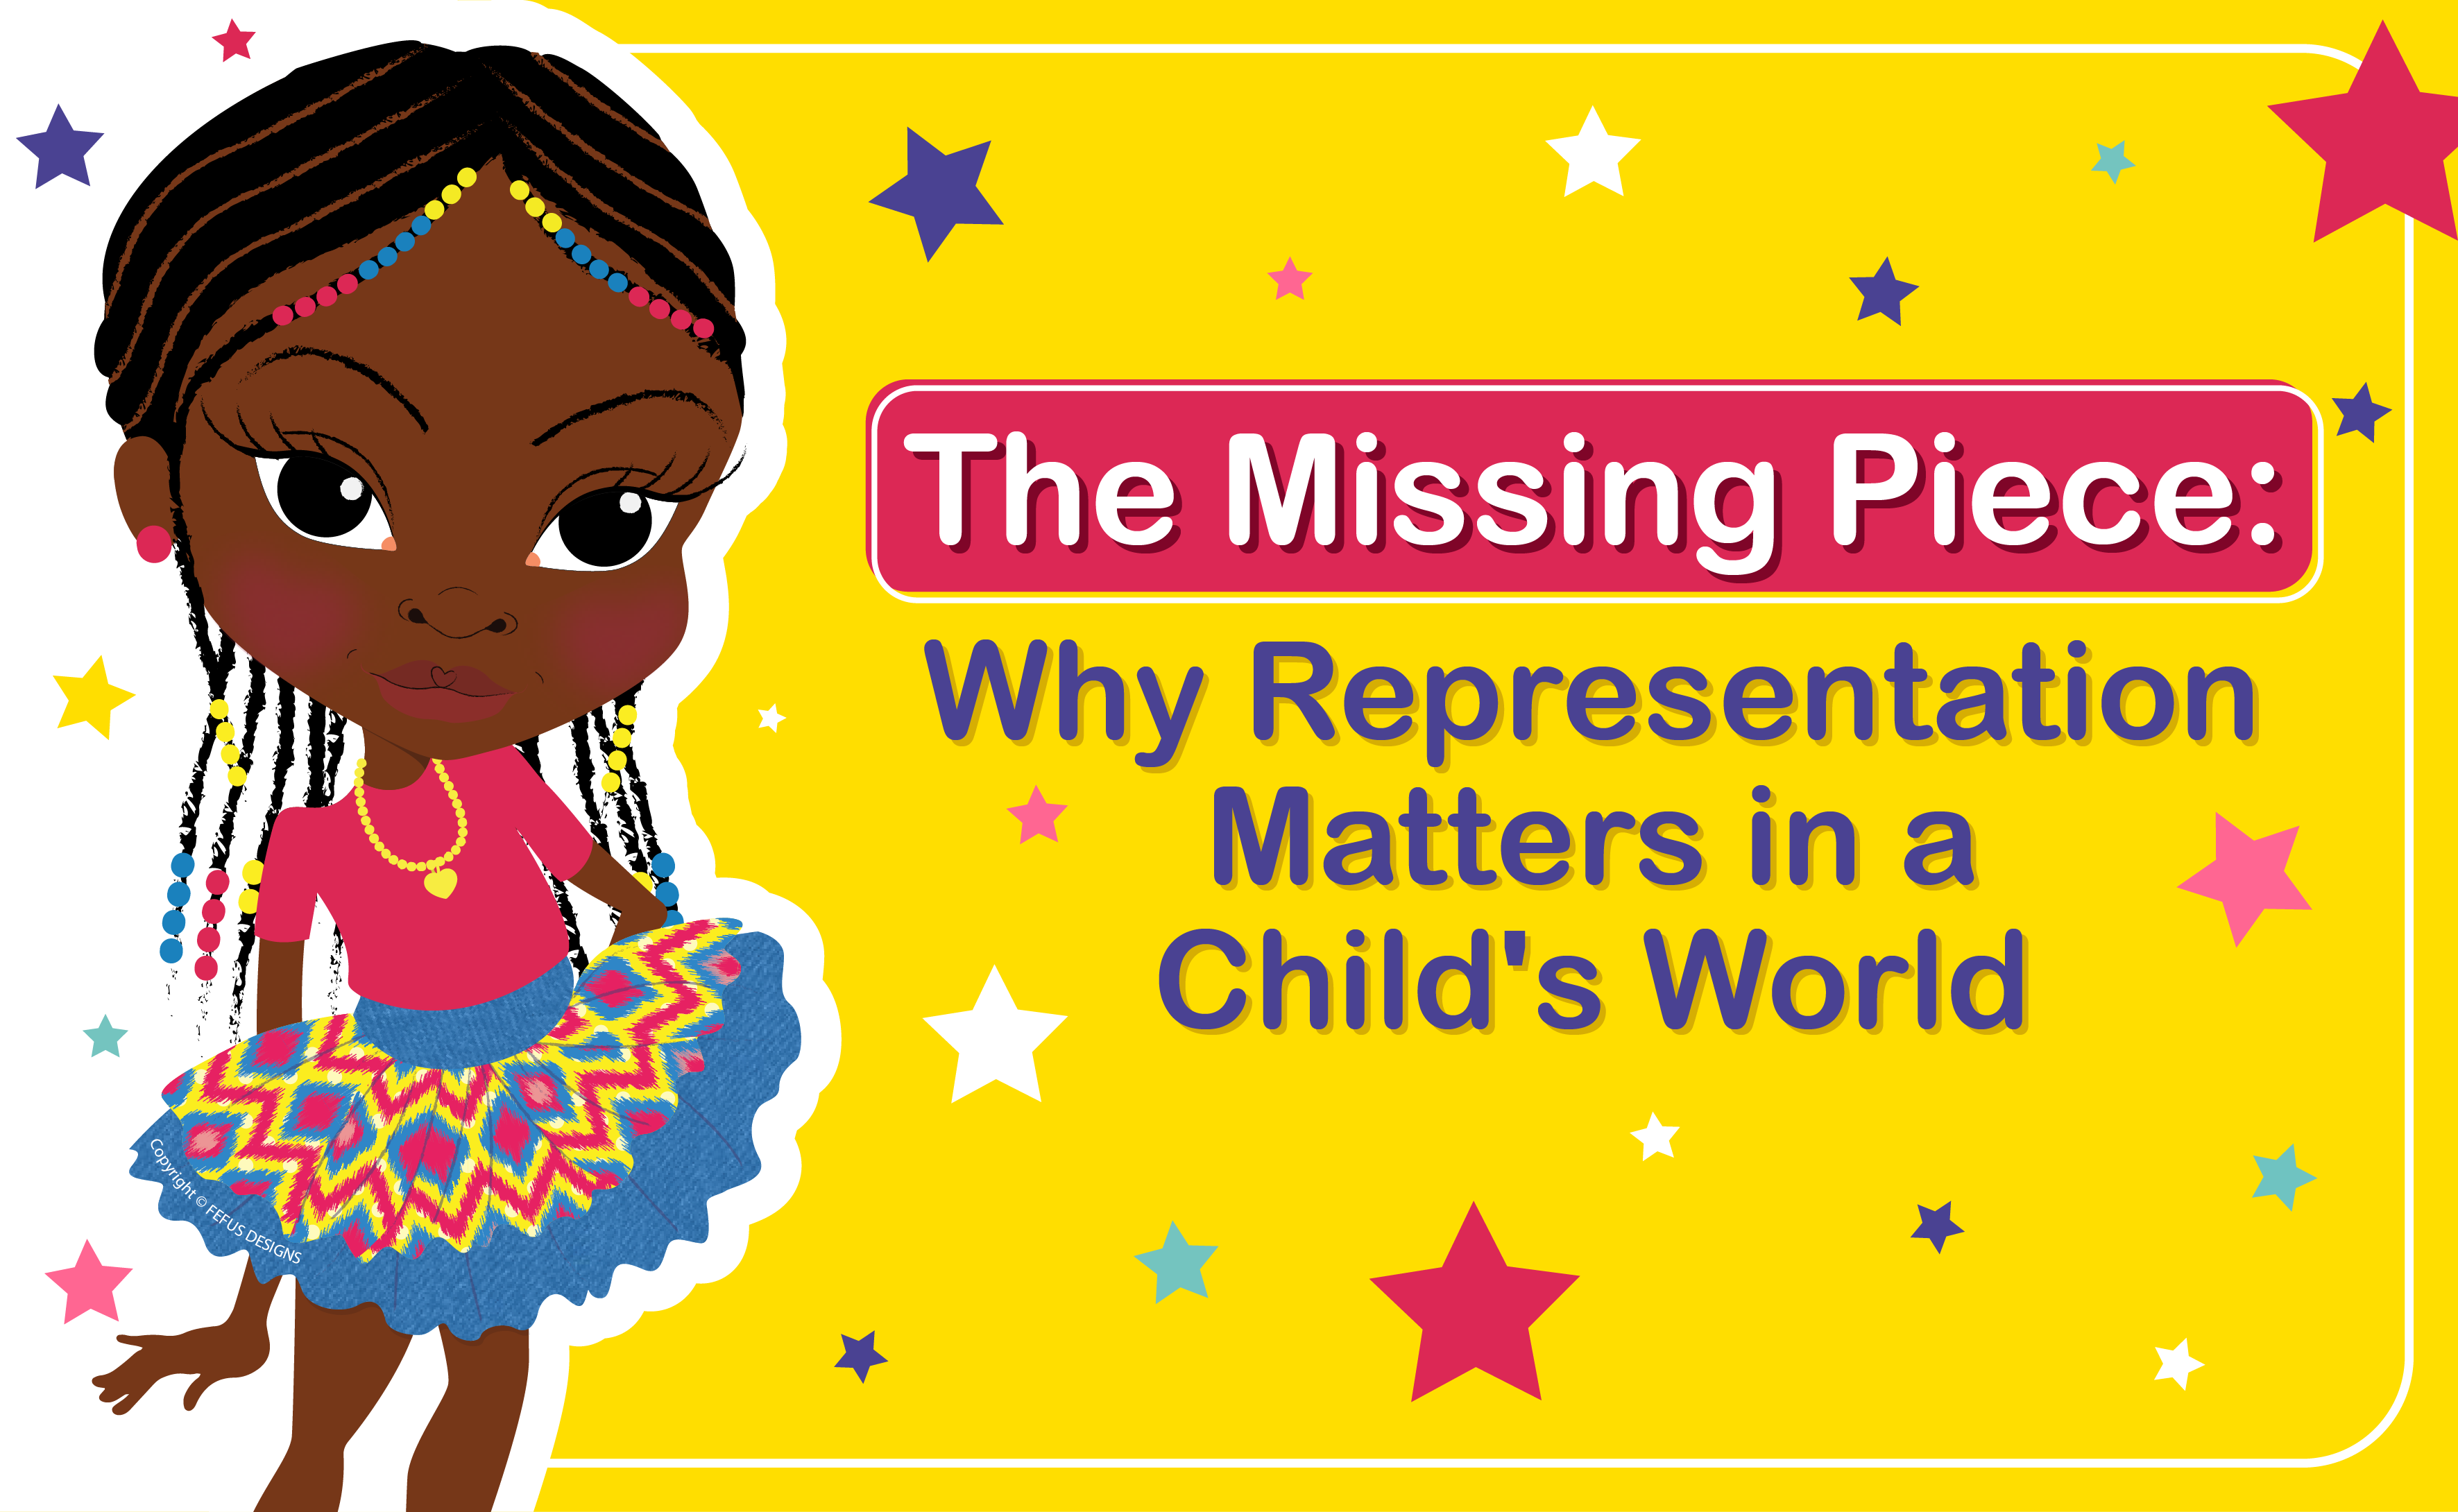 The Missing Piece: Why Representation Matters in a Child's World